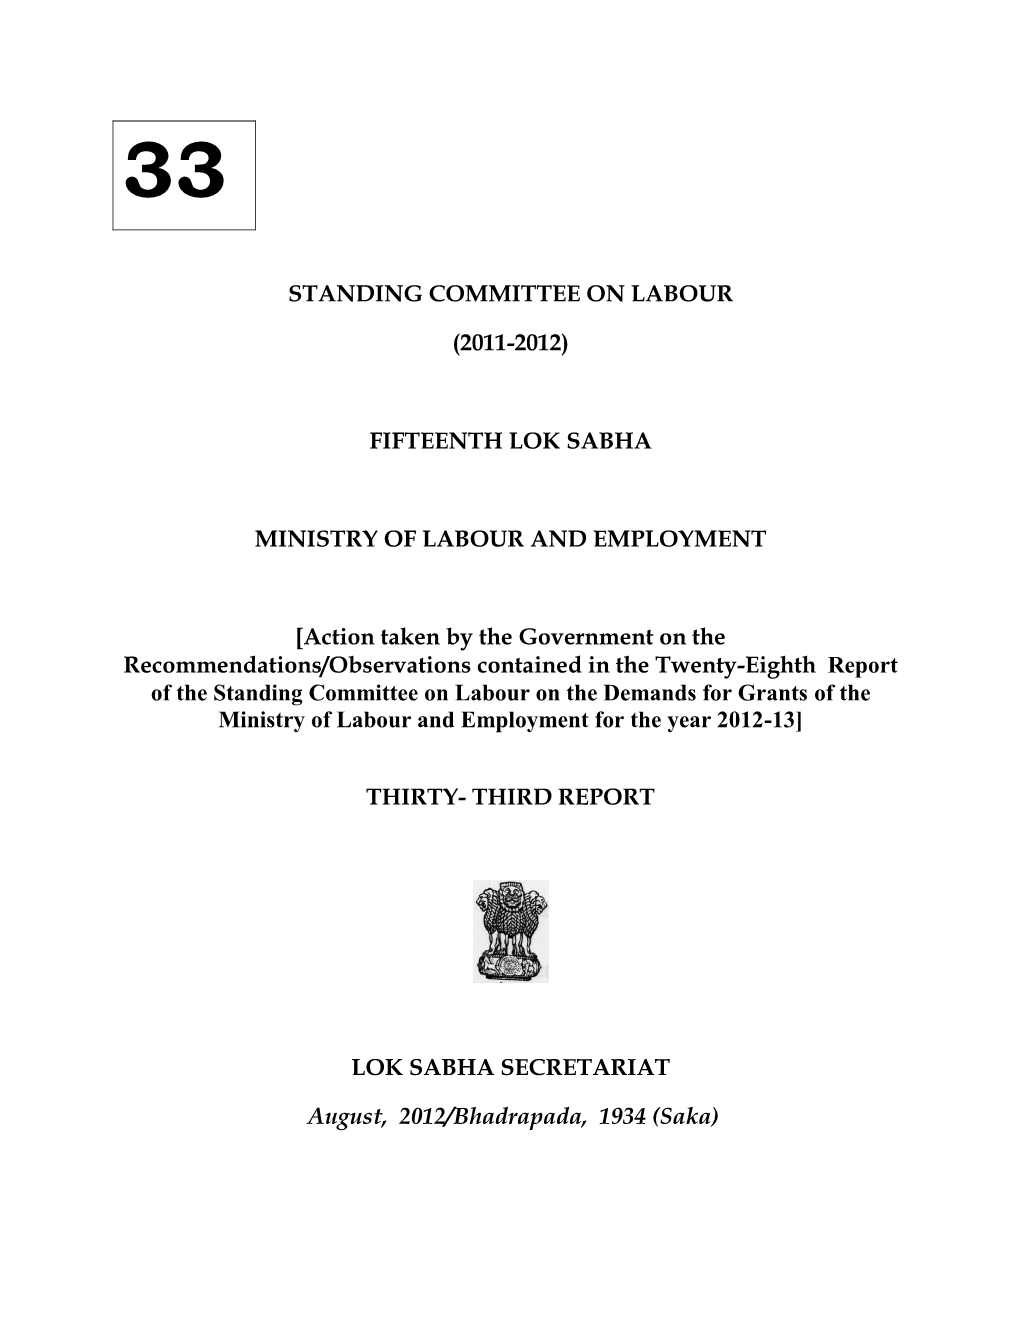 Standing Committee on Labour (2011-2012) Fifteenth